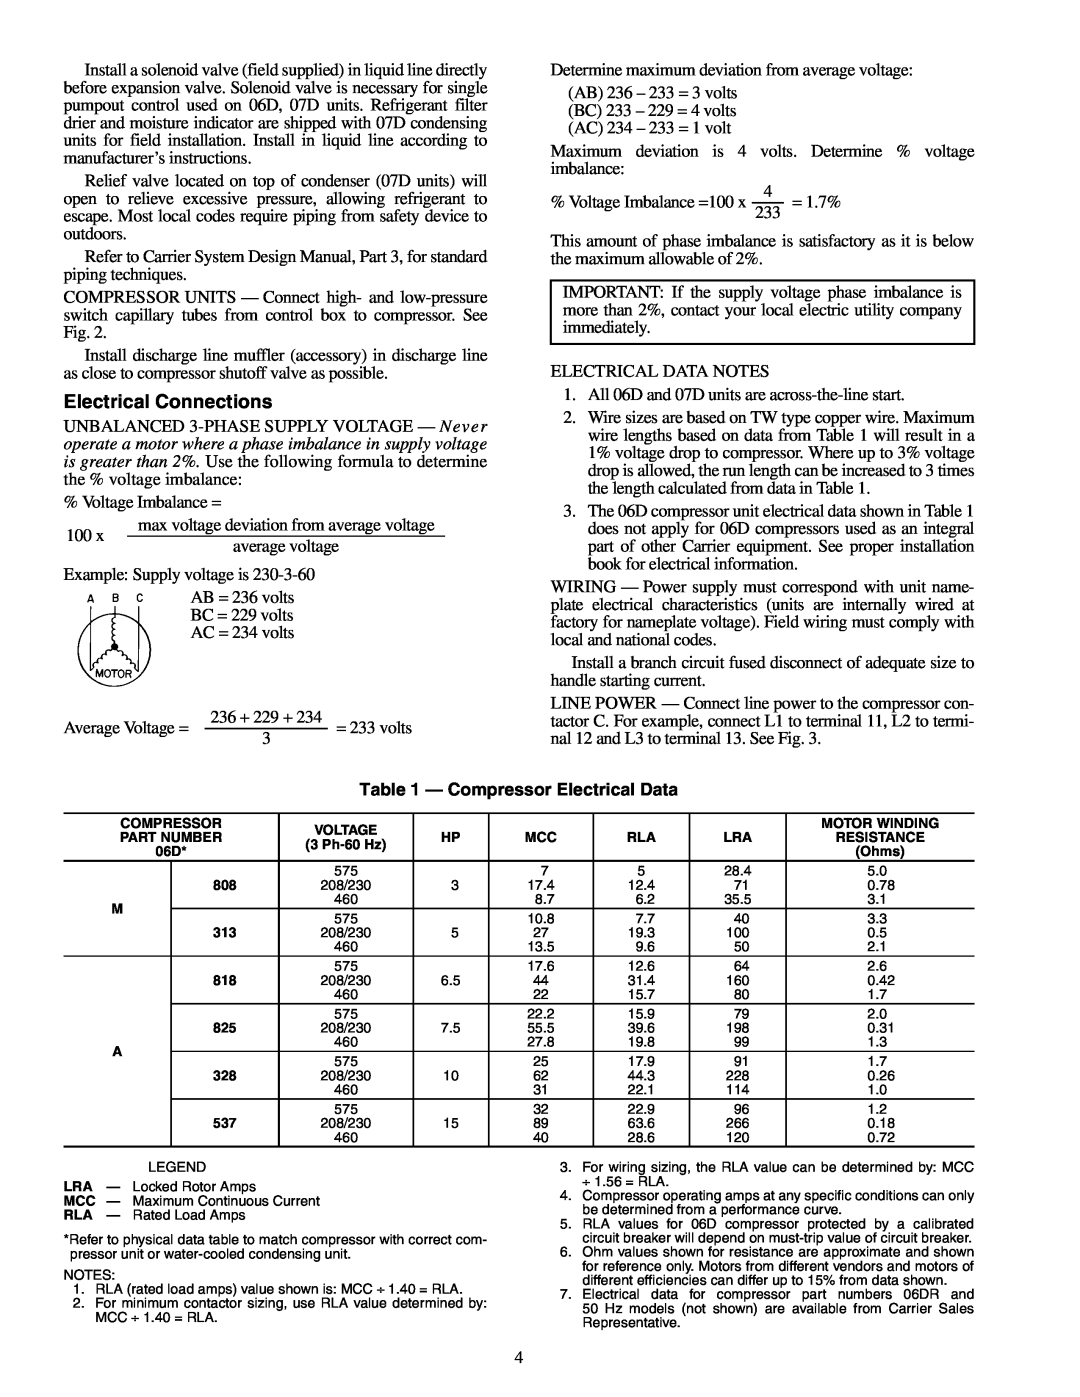 Carrier 06D specifications Electrical Connections, Compressor Electrical Data 